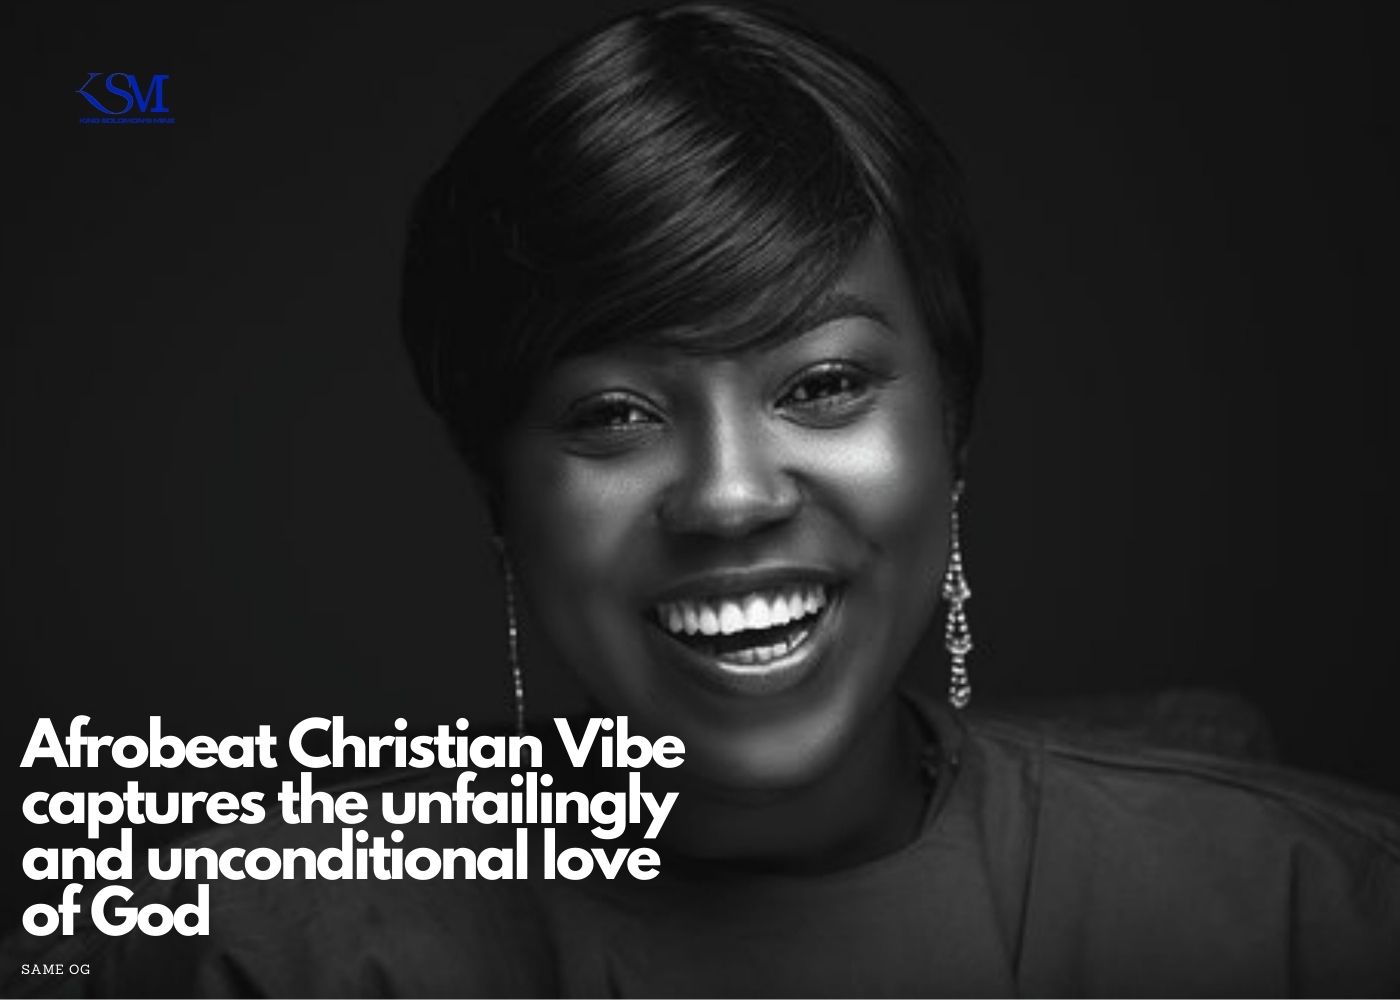 Afrobeat Christian Vibe captures the unfailingly and unconditional love of God